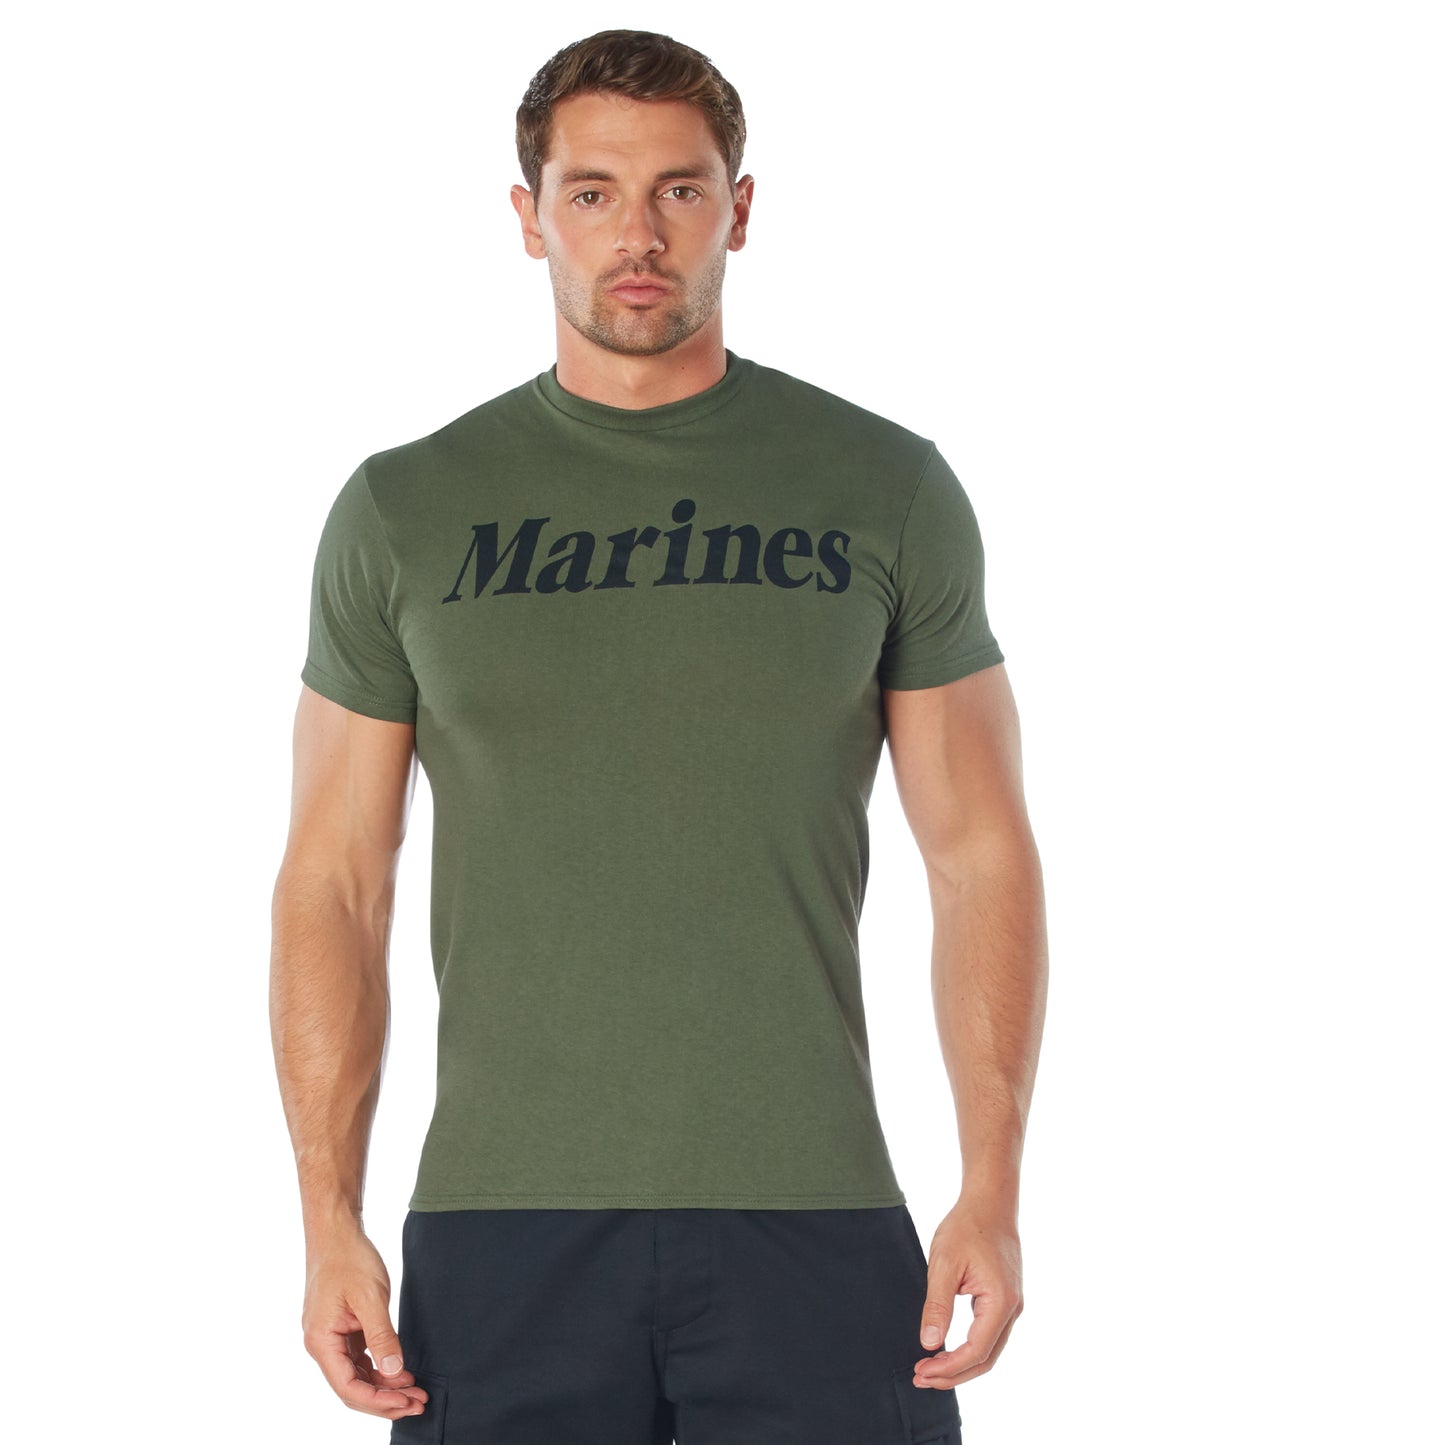 Olive Drab Military Physical Training T-Shirts